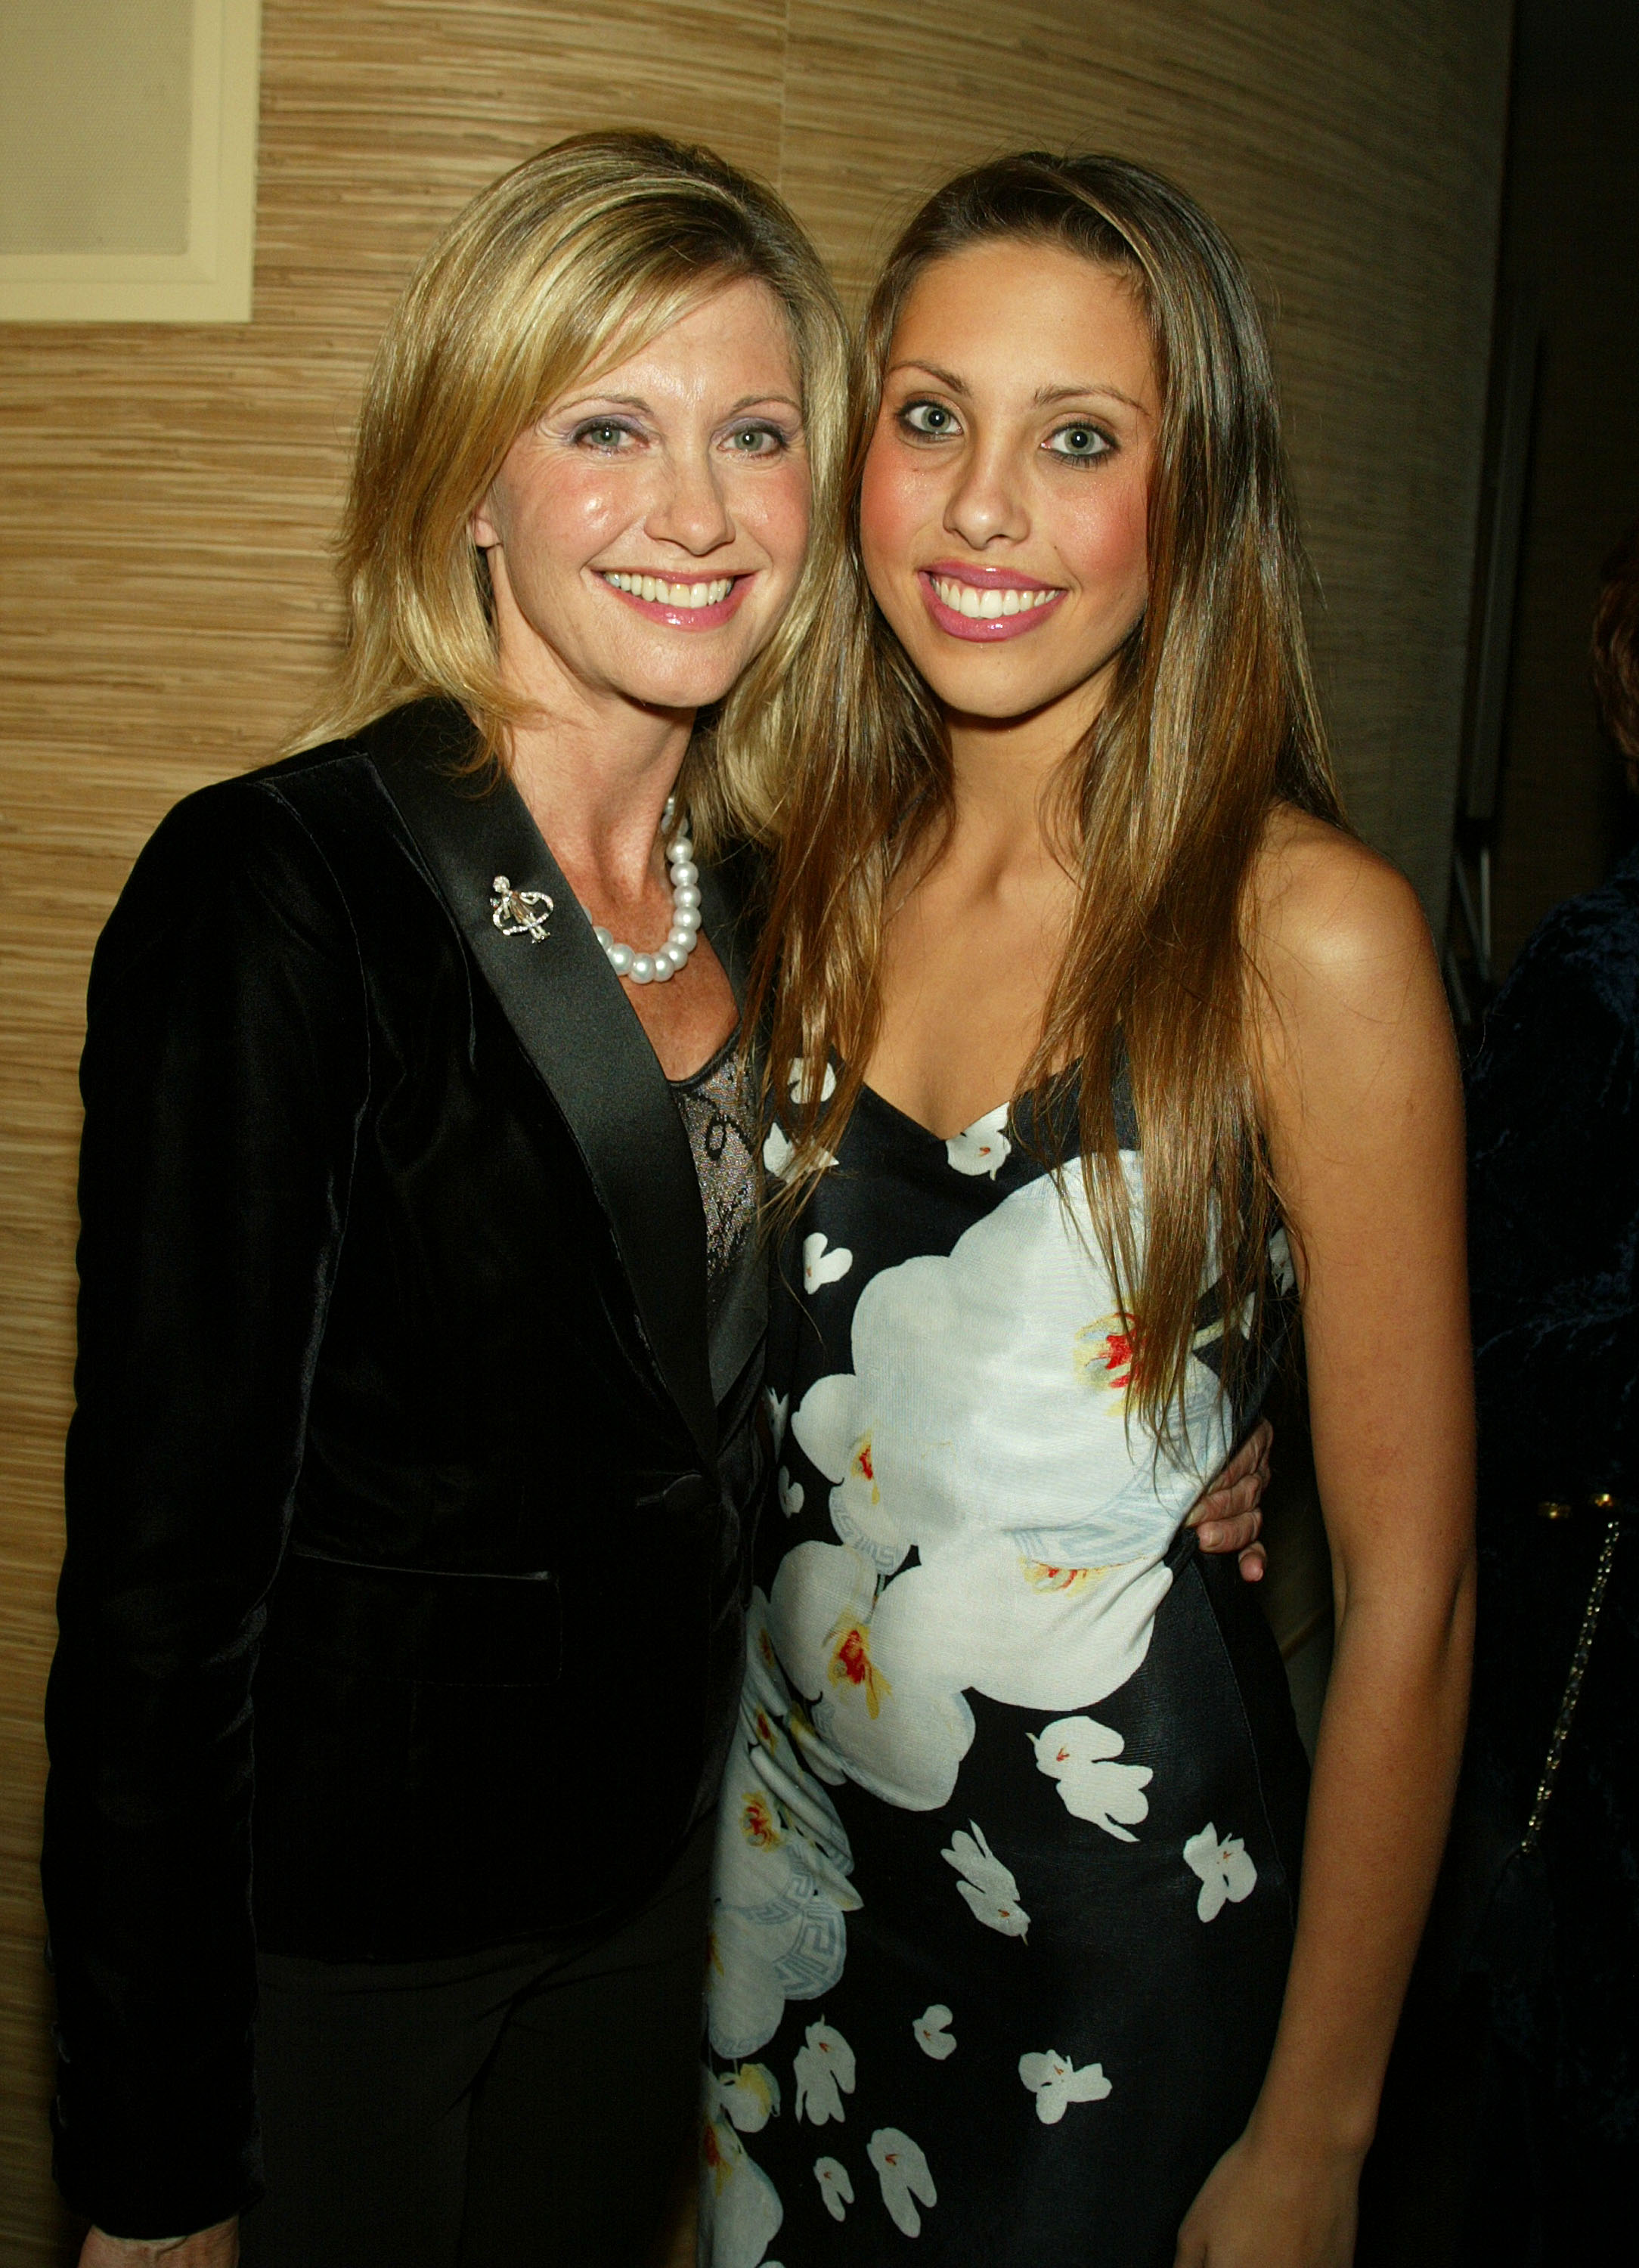 Olivia Newton-John and daughter Chloe Lattanzi at the "One World, One Child Benefit Concert" in Beverly Hills, California, in 2002. | Source: Getty Images